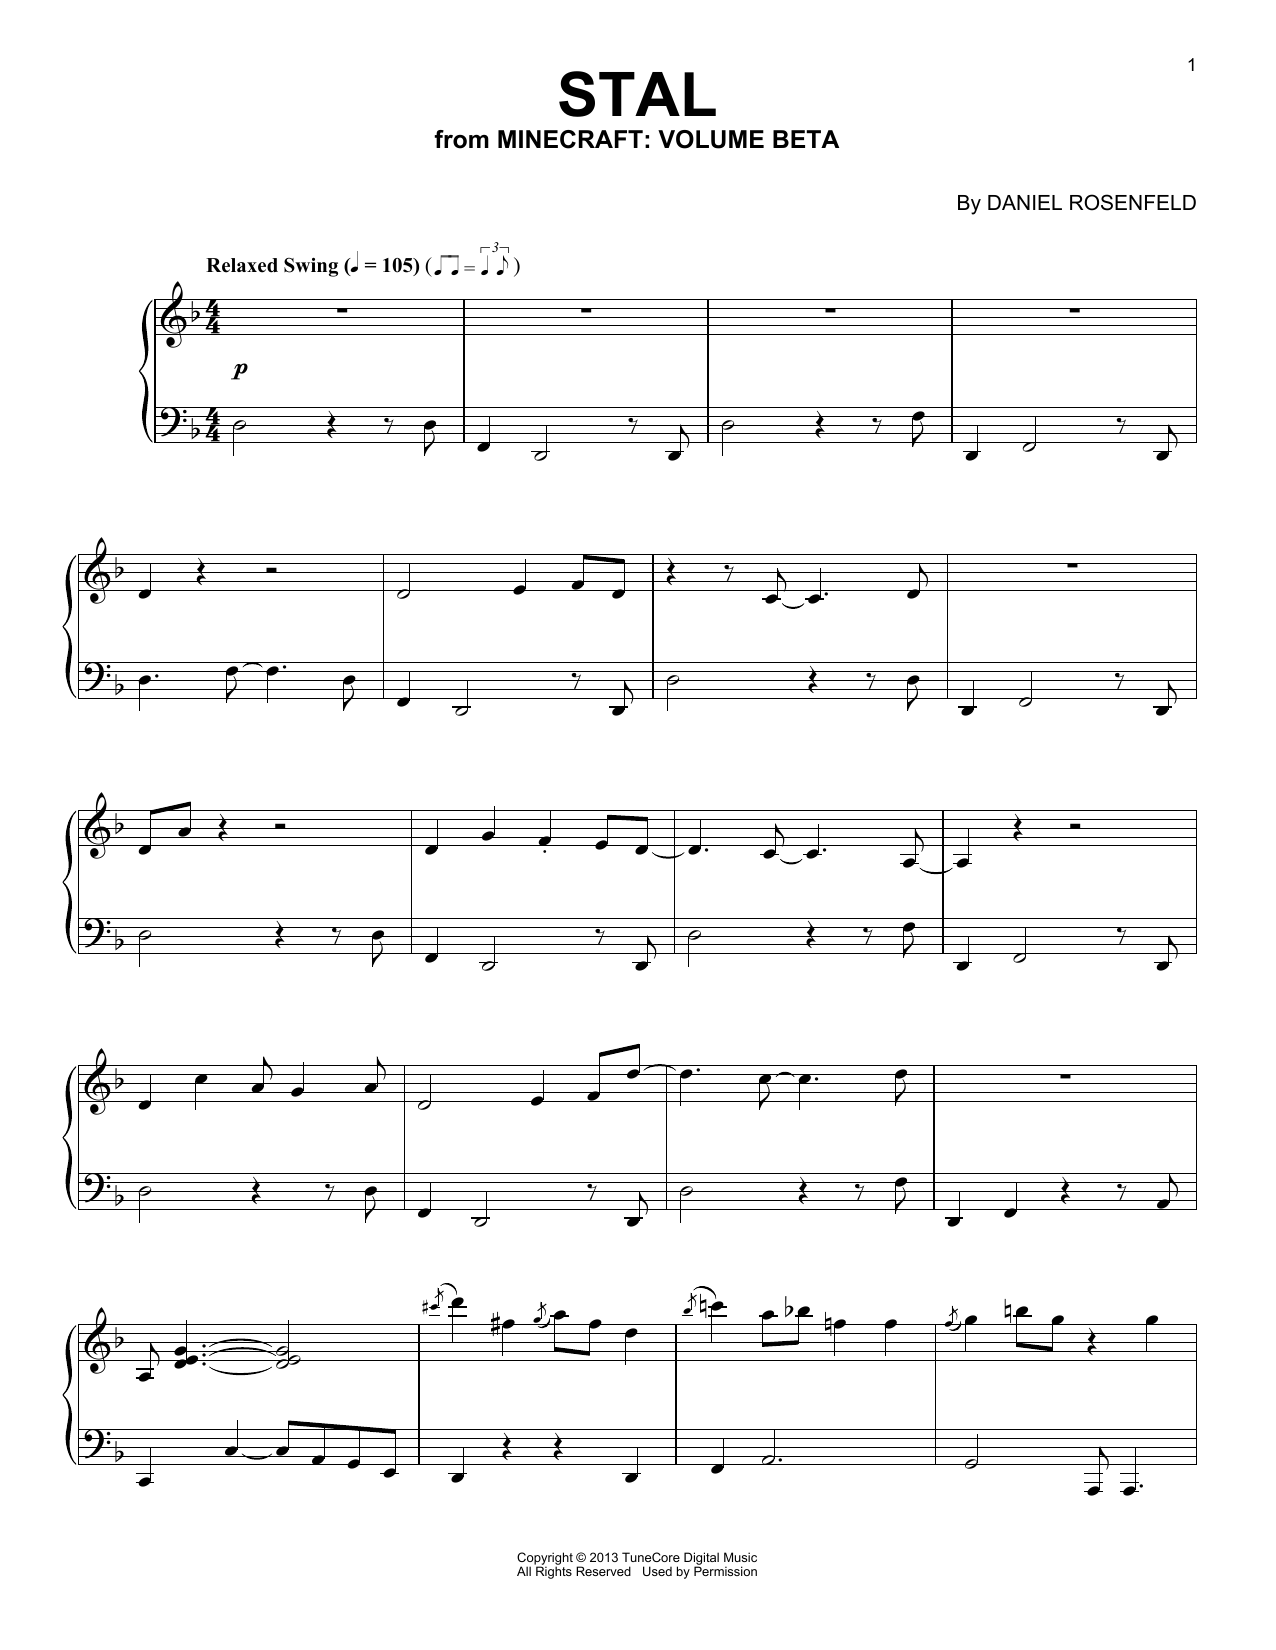 Download C418 Stal (from Minecraft) Sheet Music